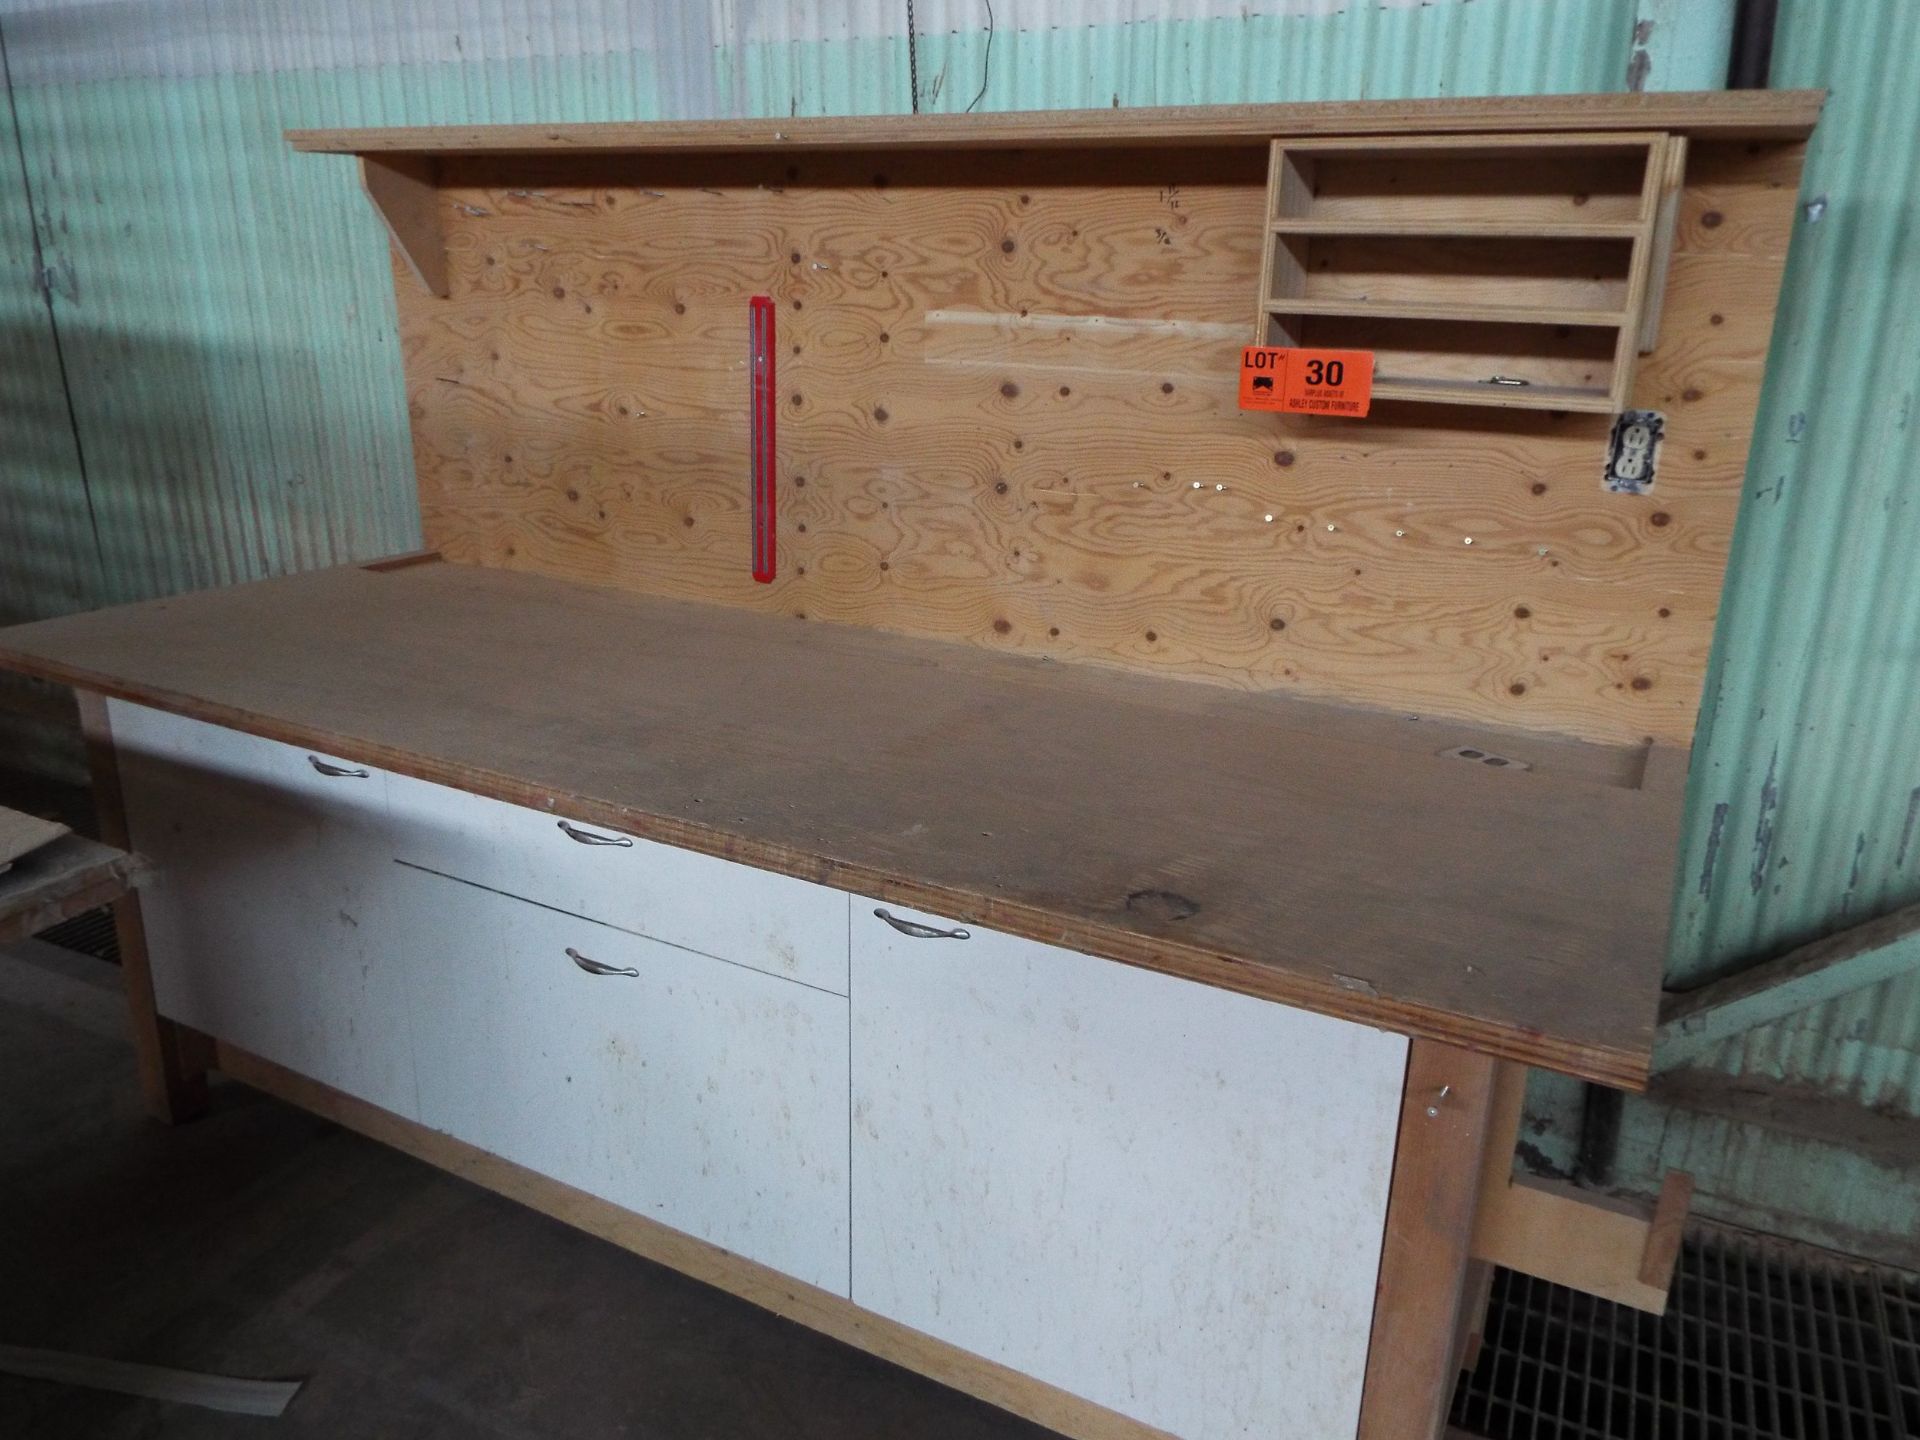 WORK BENCH WITH POWER (CI) [RIGGING FEE FOR LOT#30 - CANADIAN INDUSTRIAL SERVICES - $50 PLUS TAXES]